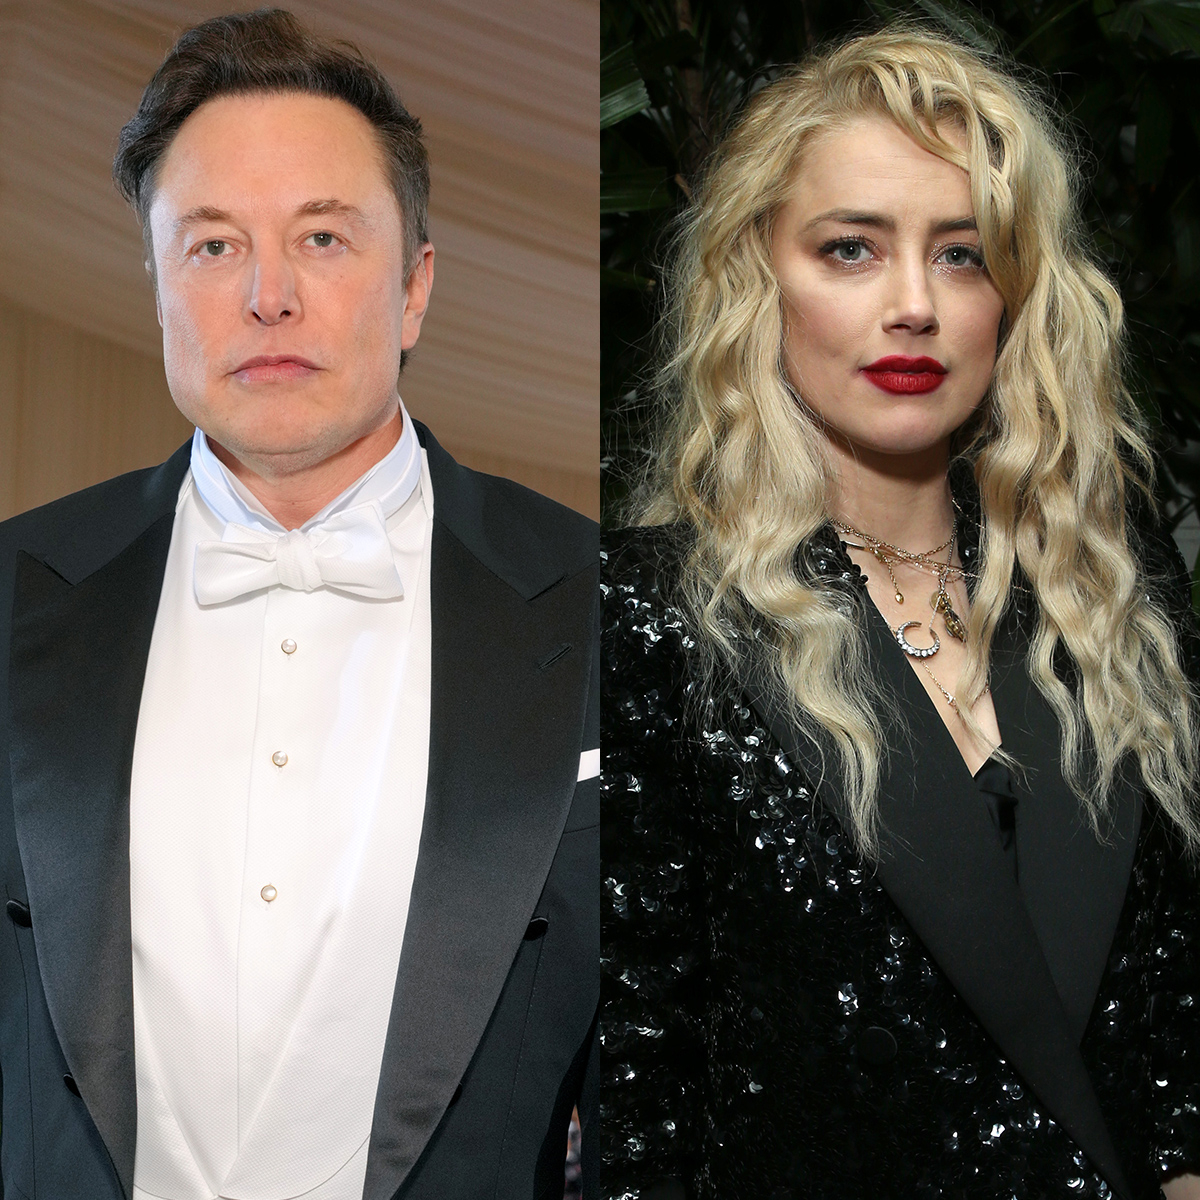 Elon Musk Reflects on “Brutal” Relationship With Amber Heard